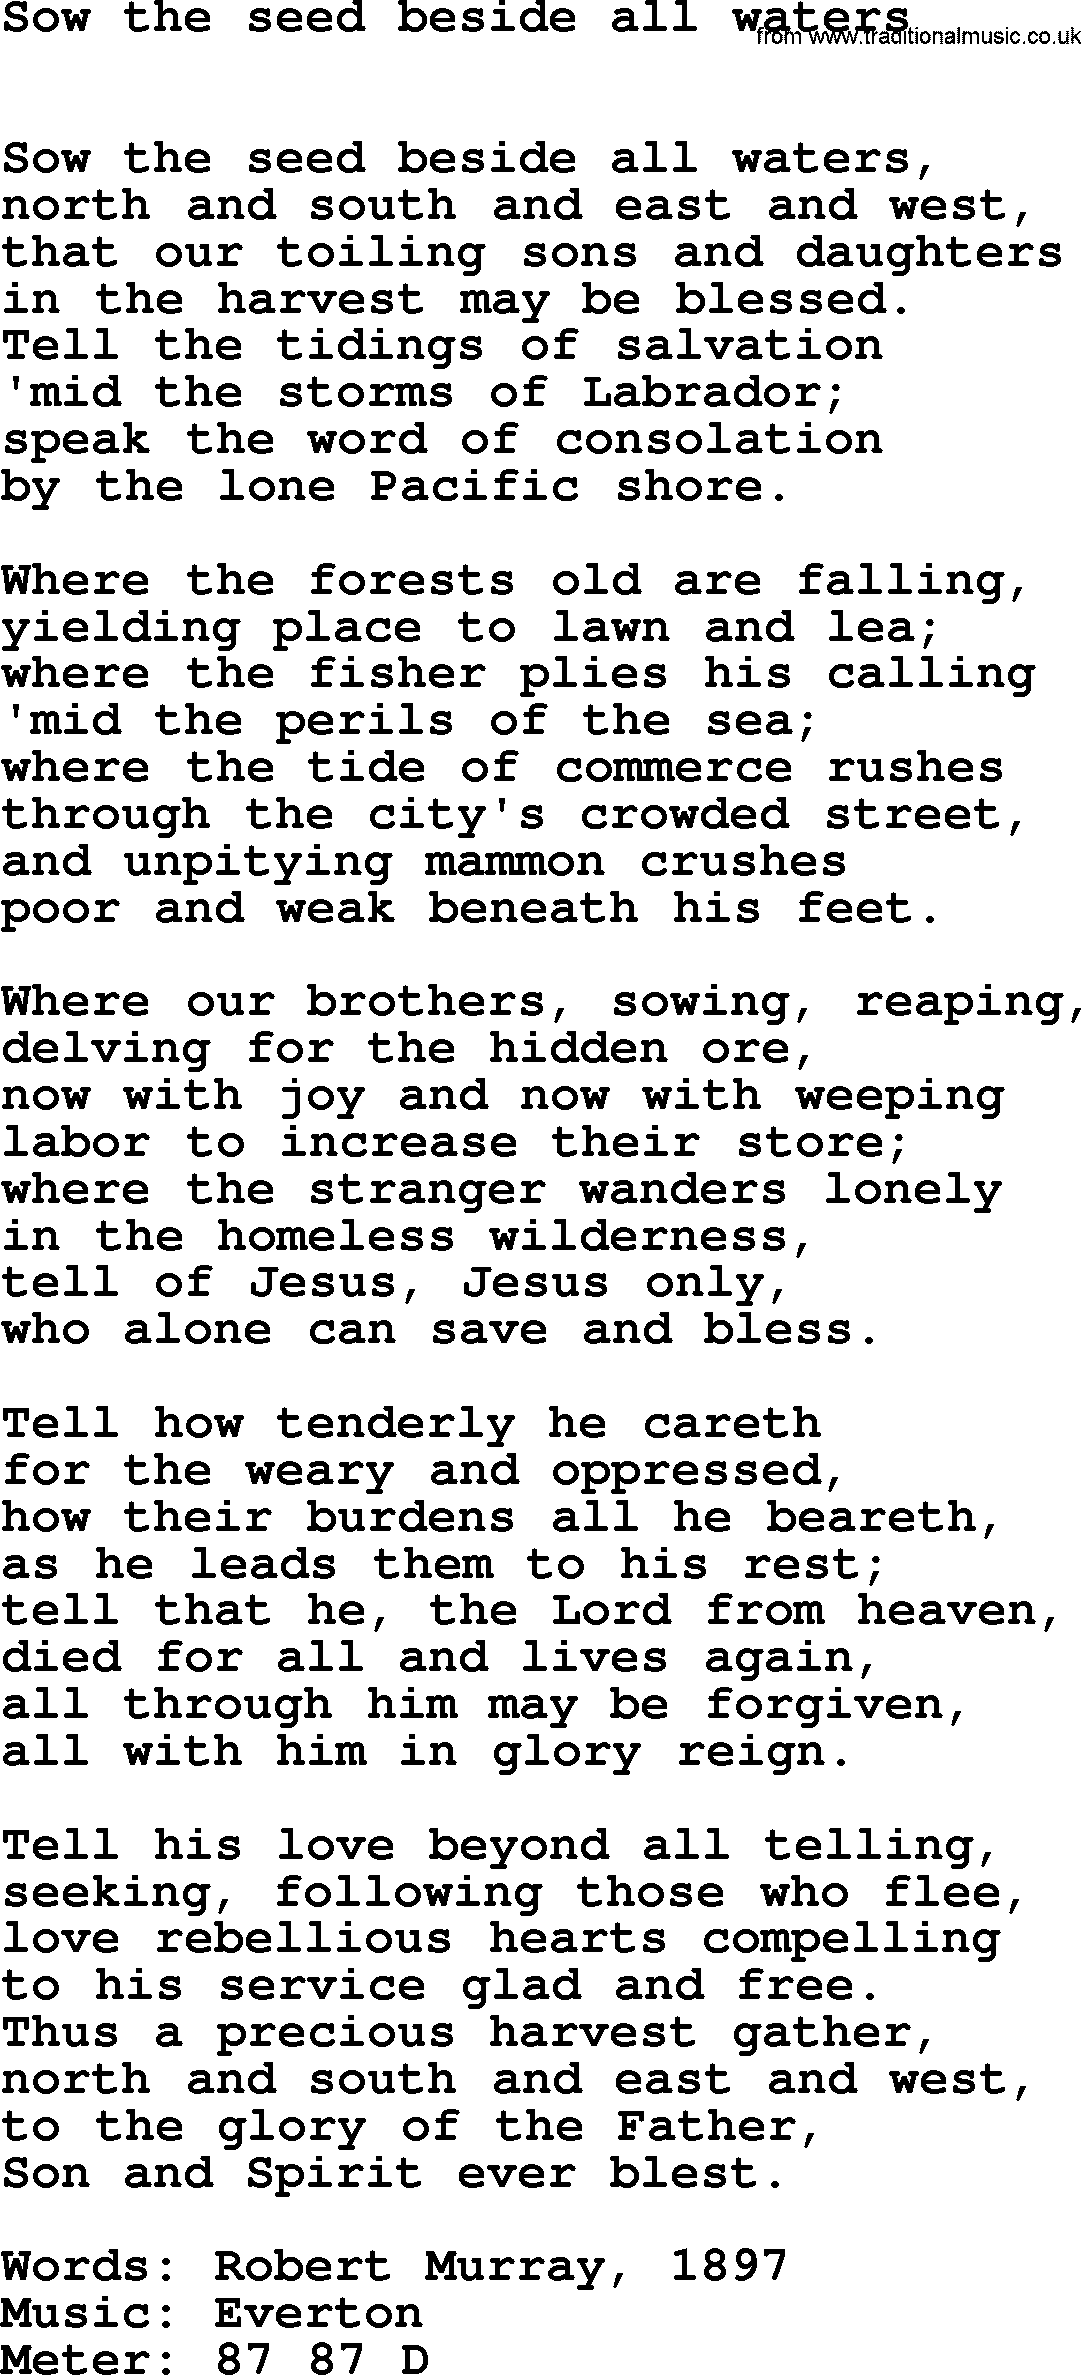 Book of Common Praise Hymn: Sow The Seed Beside All Waters.txt lyrics with midi music